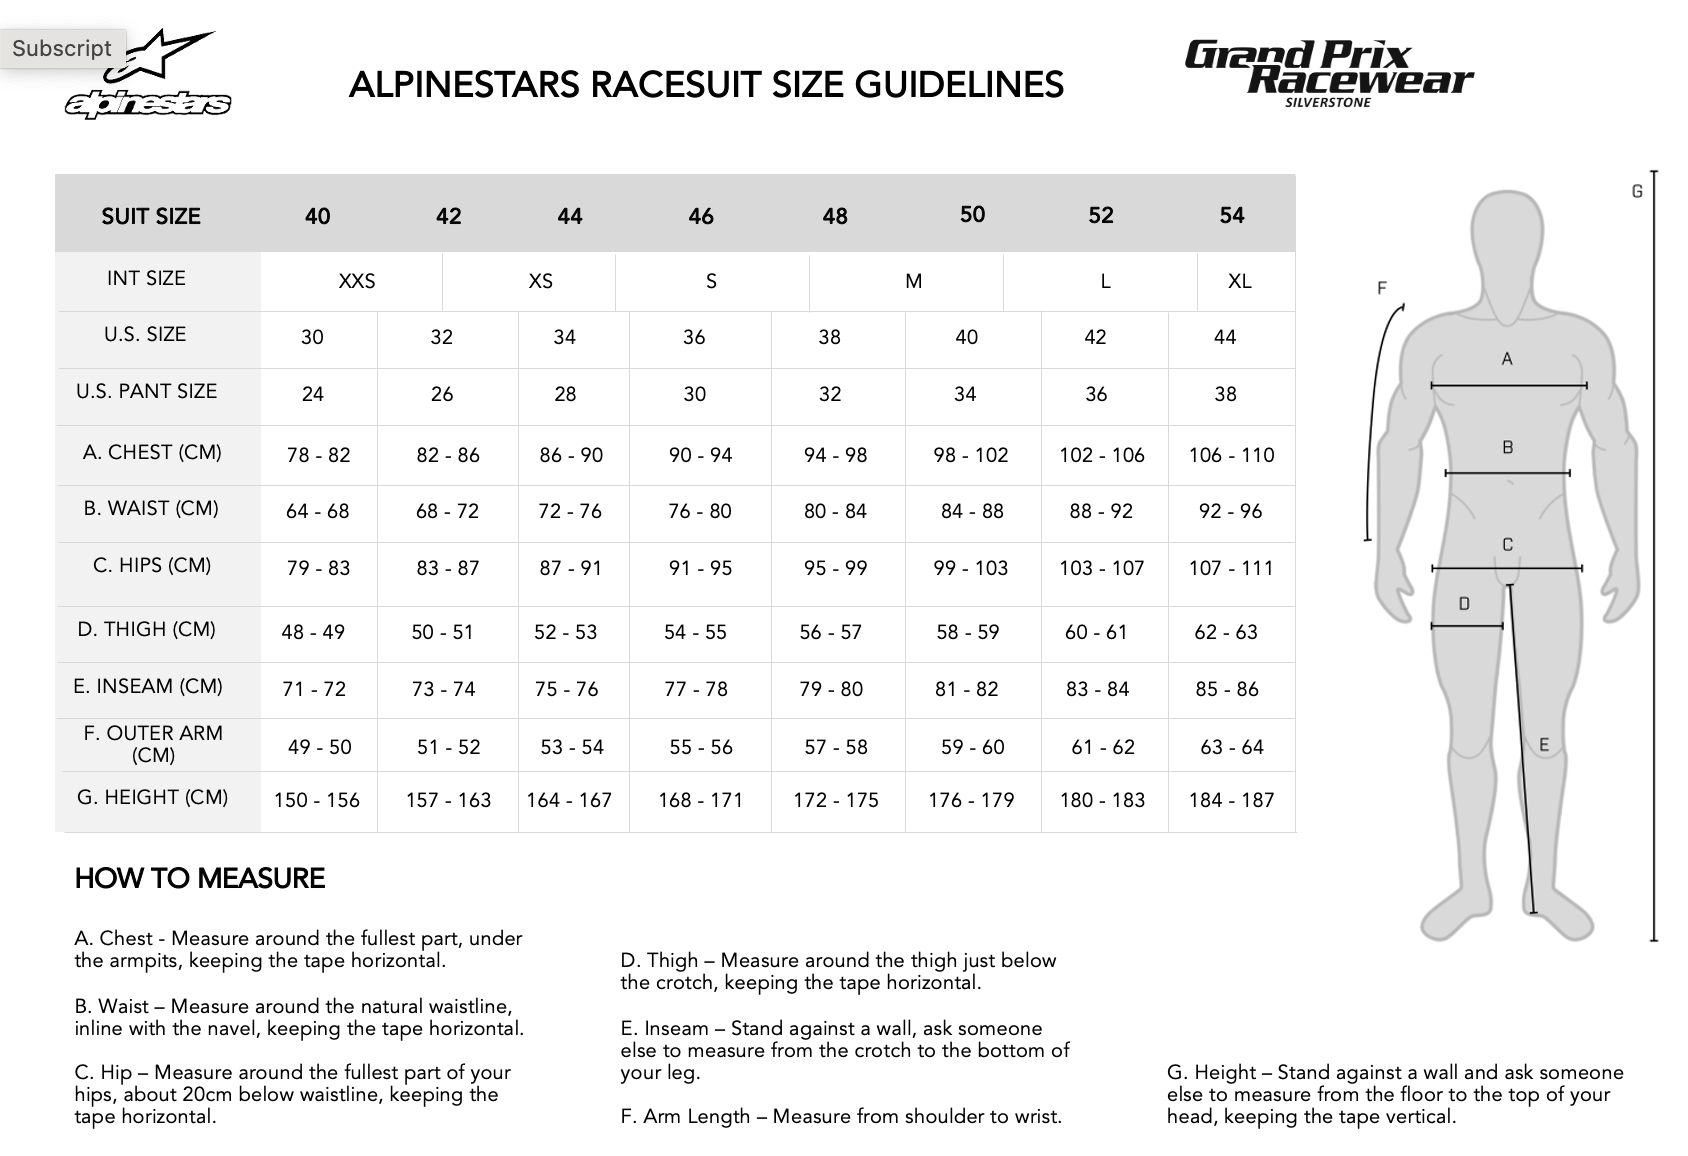 Size guide for Adult Alpinestars Race Suits available from www.gprdirect.com